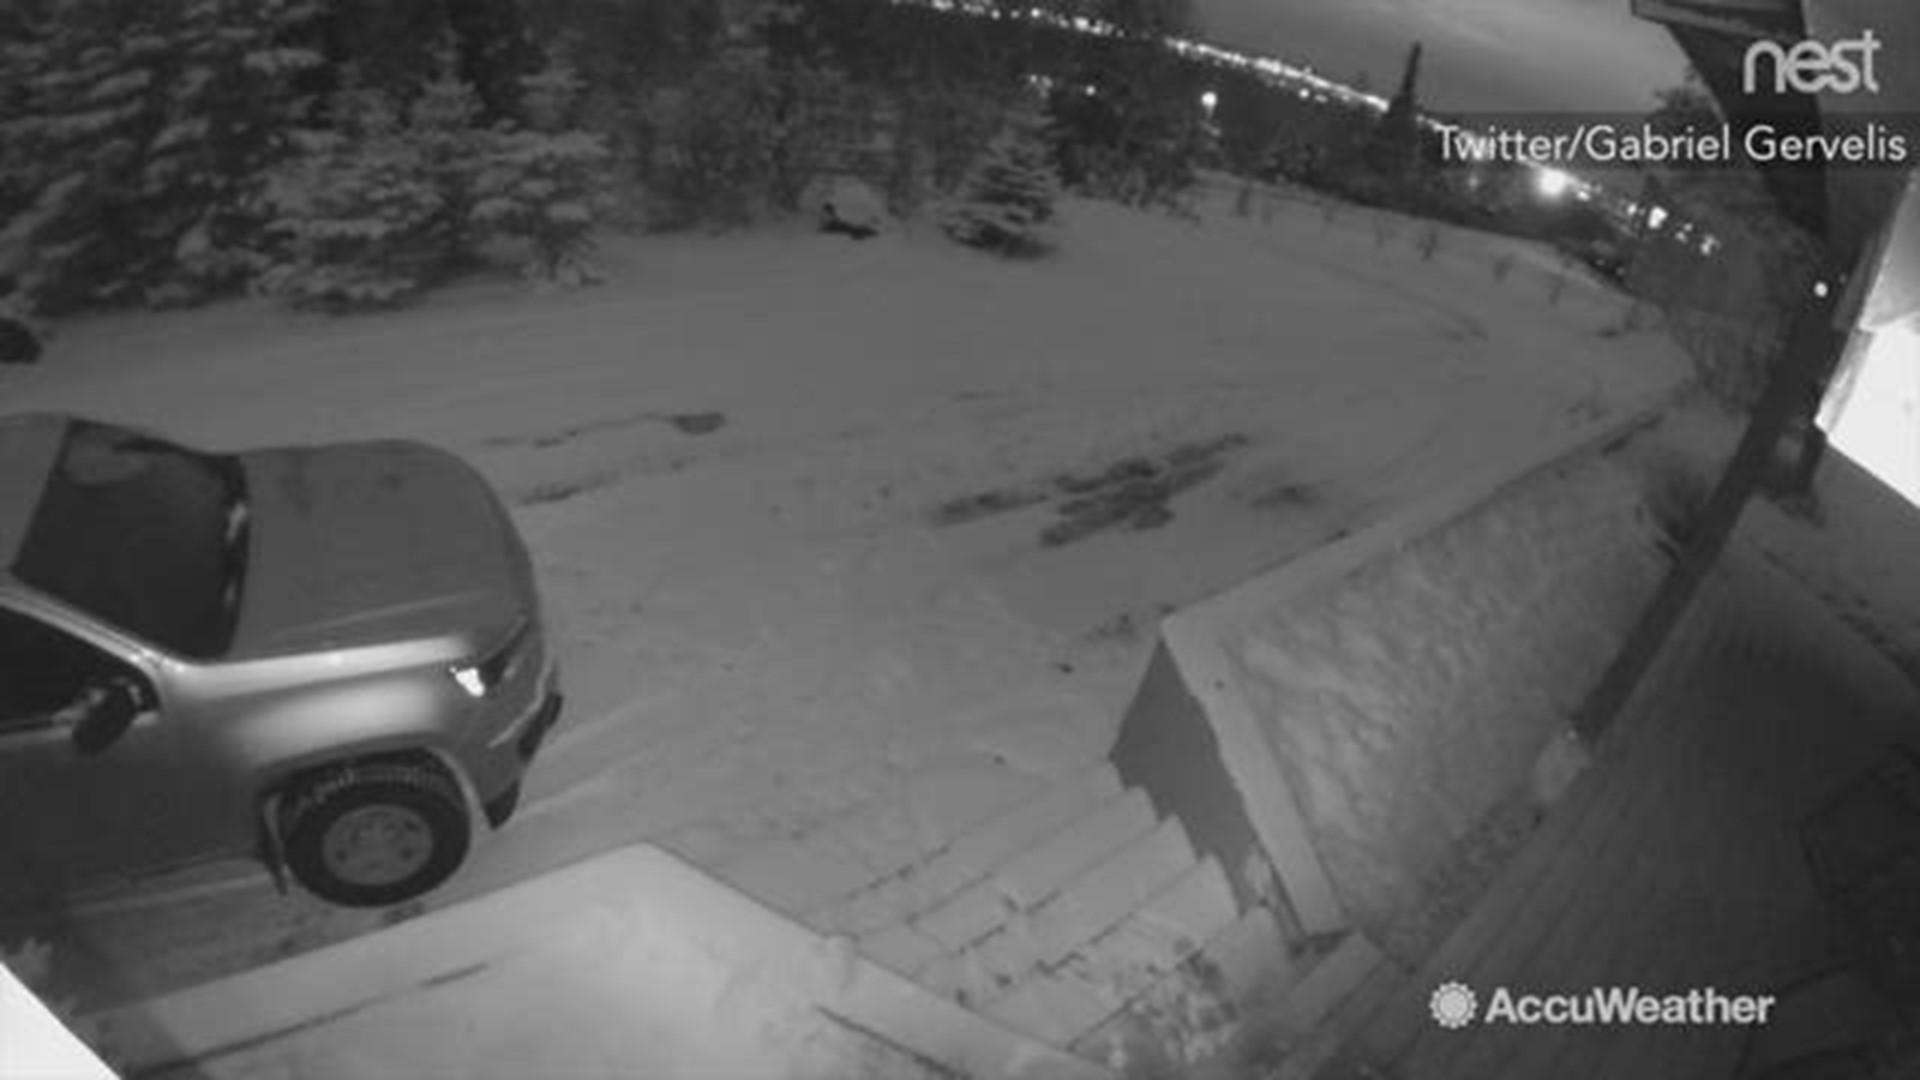 This nest cam video shows the car moving and transformers blowing up in the background after a 7.0 magnitude earthquake struck Anchorage, Alaska on Nov.30.